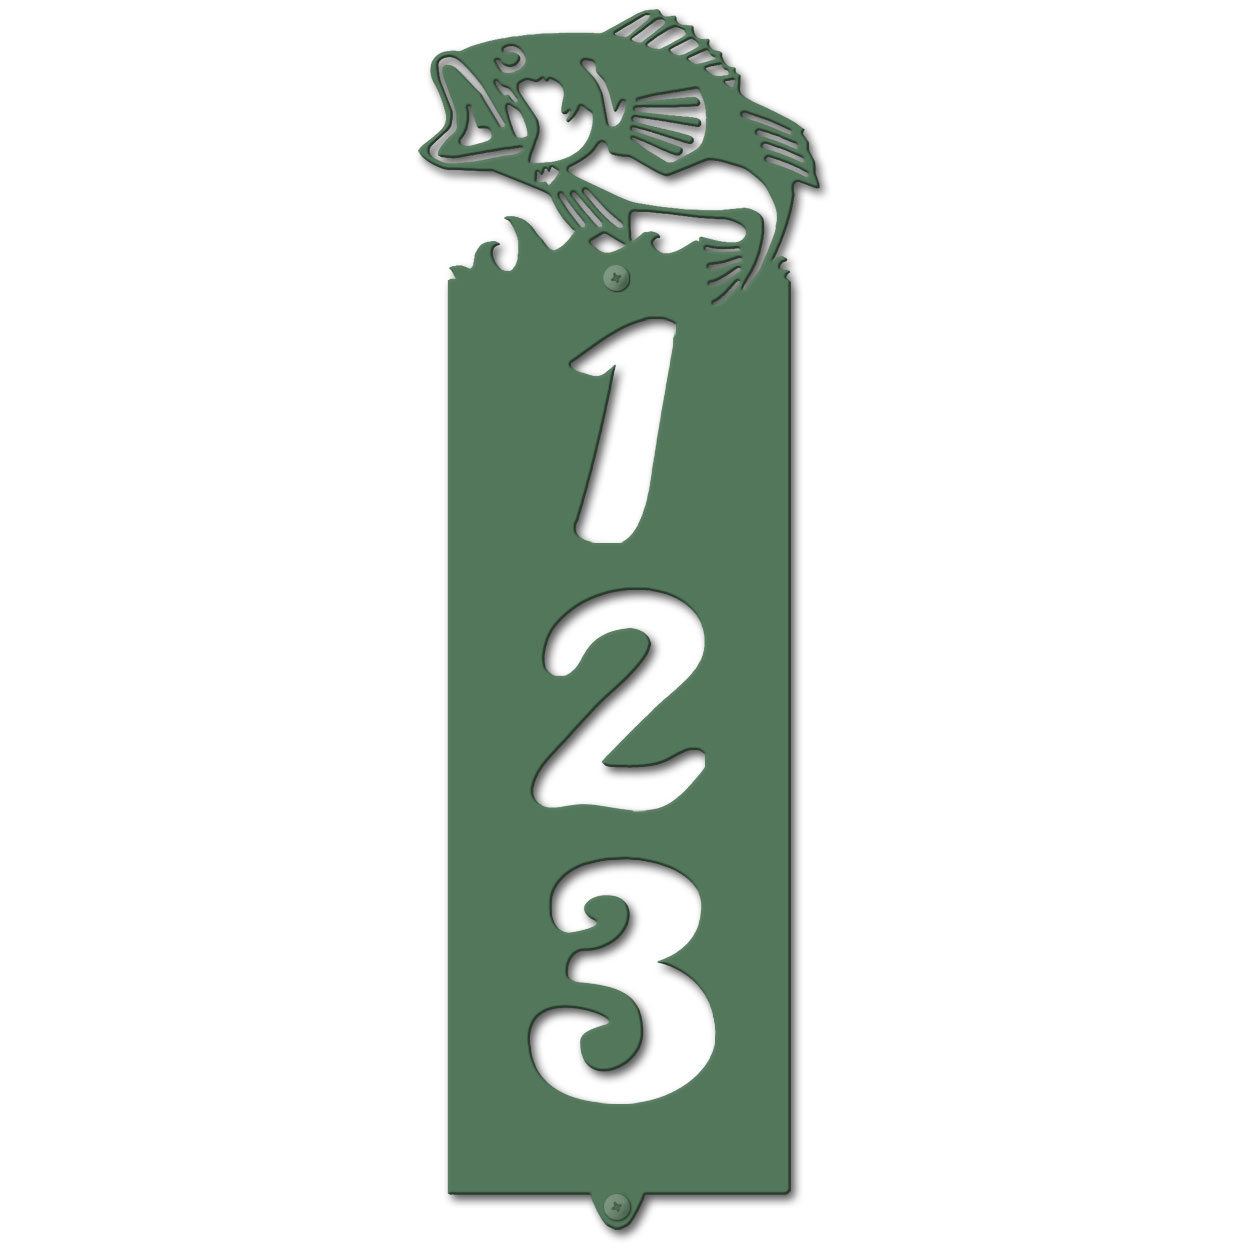 635003 - Bass Cut Outs Three Digit Address Number Plaque